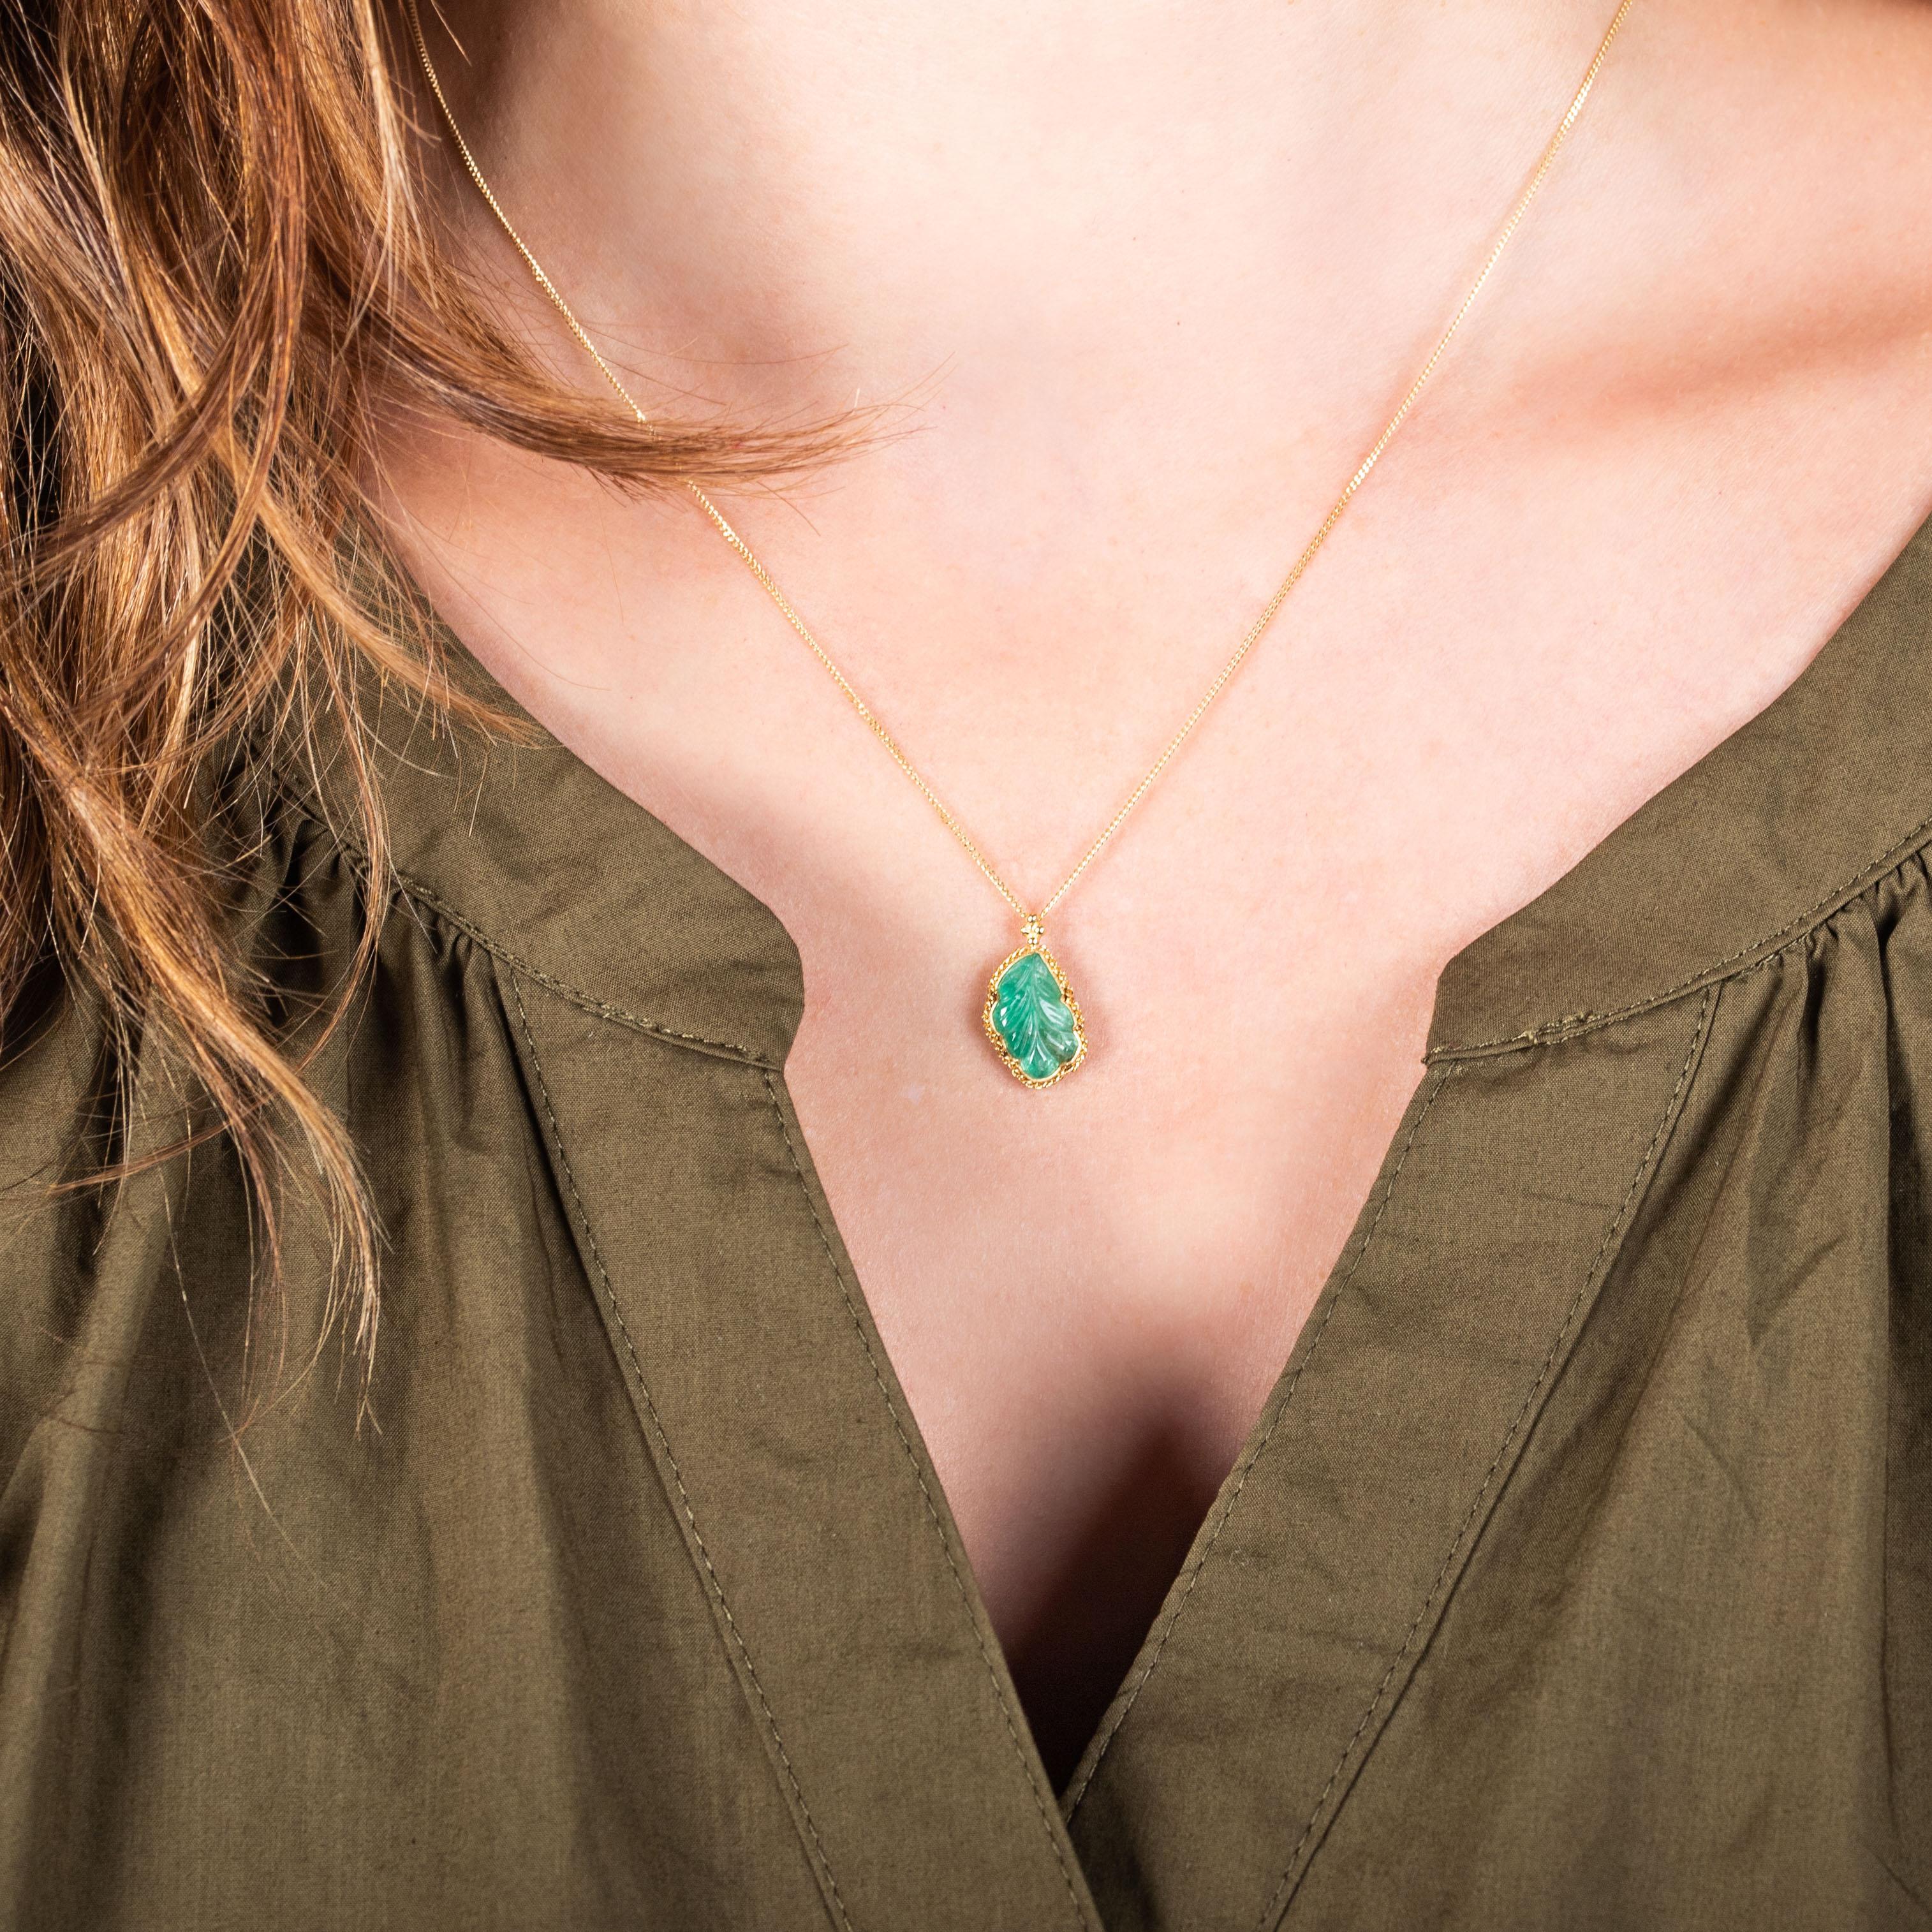 This show-stopping Emerald has been expertly carved into the shape of a leaf with delicate veins delineated by subtle grooves in the stone’s surface. Reminiscent of a rare tropical plant, the gem glows with Emerald’s famous verdant lushness.